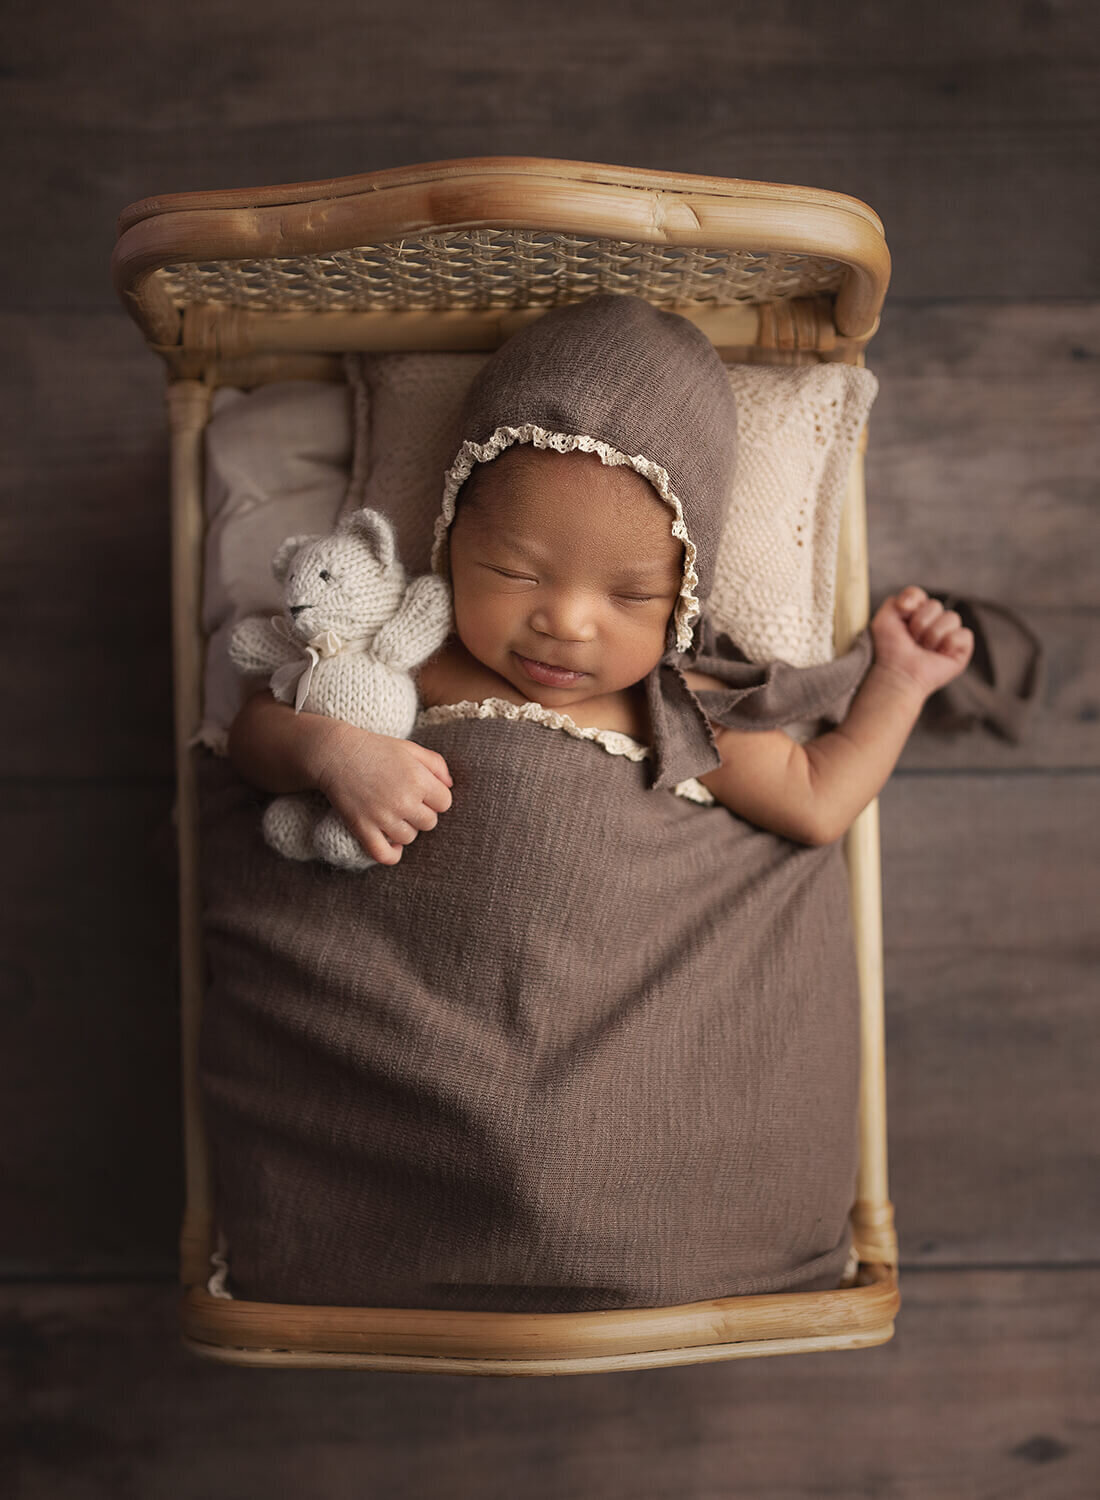 A newborn baby sleeps in a small wicker bed holding a stuffed bear by a New Orleans Newborn Photographer